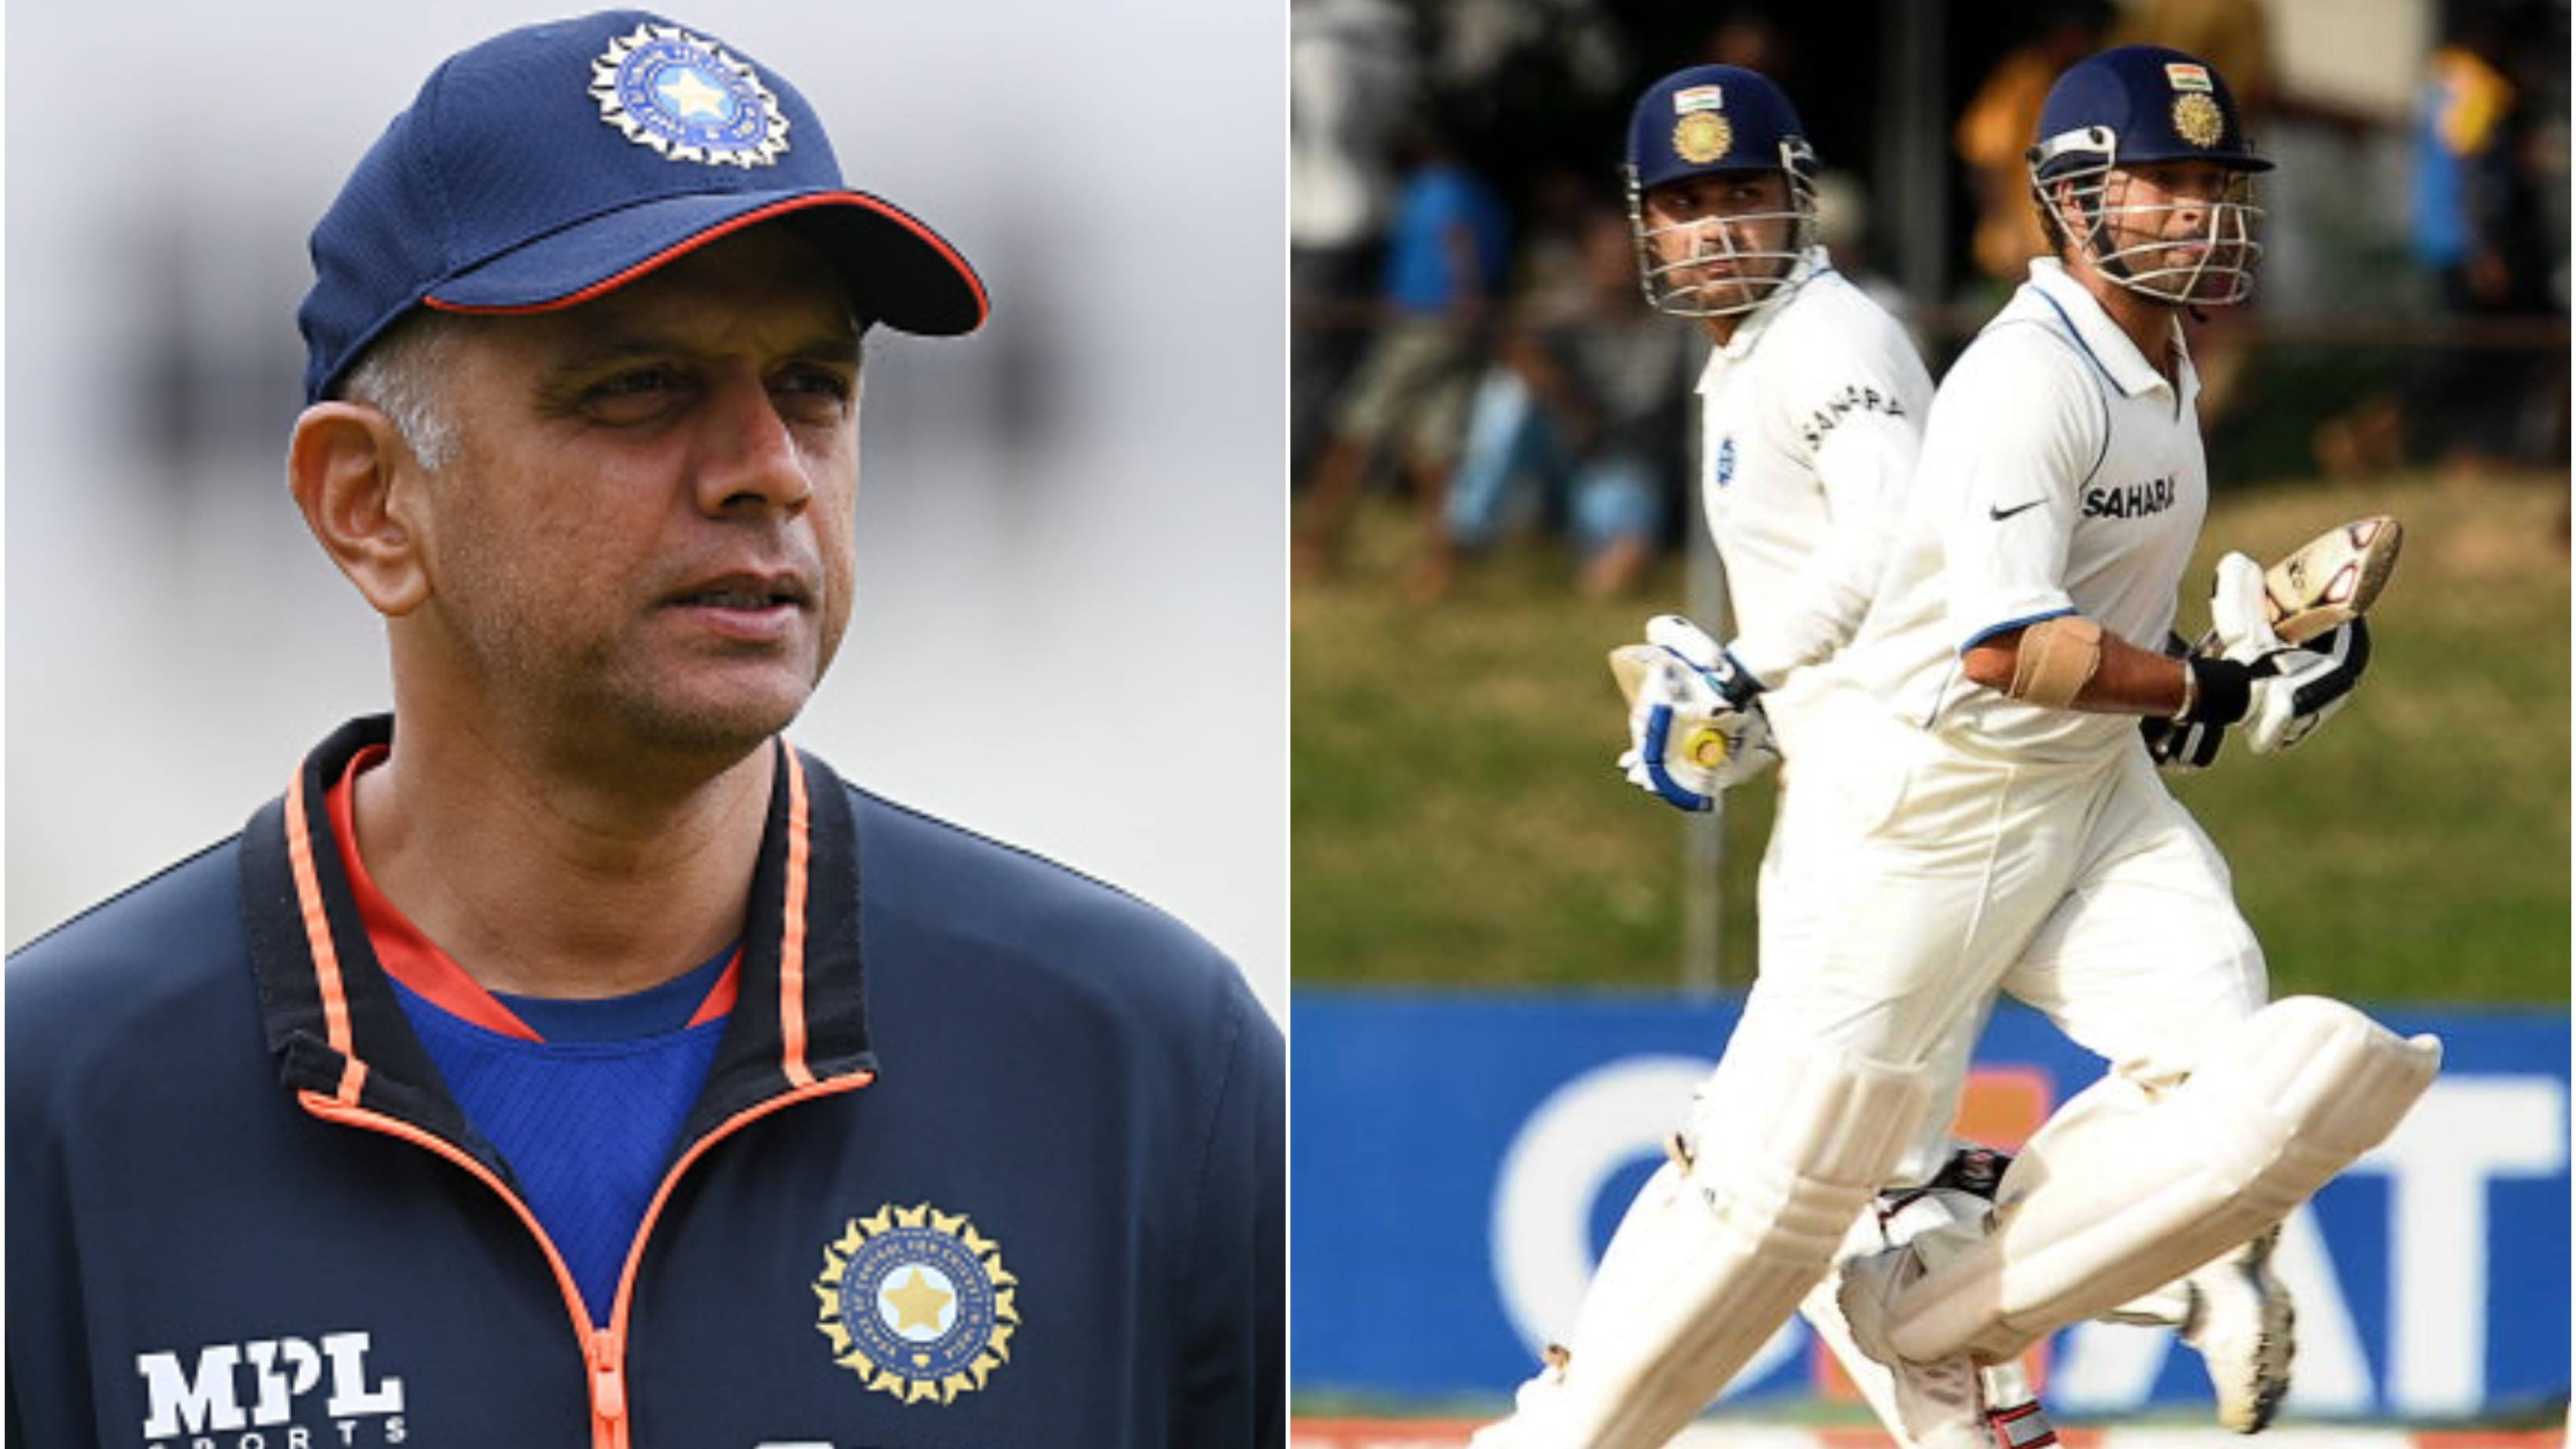 ‘I was never going to be like Sehwag or Sachin’, says Rahul Dravid as he talks about patience while batting